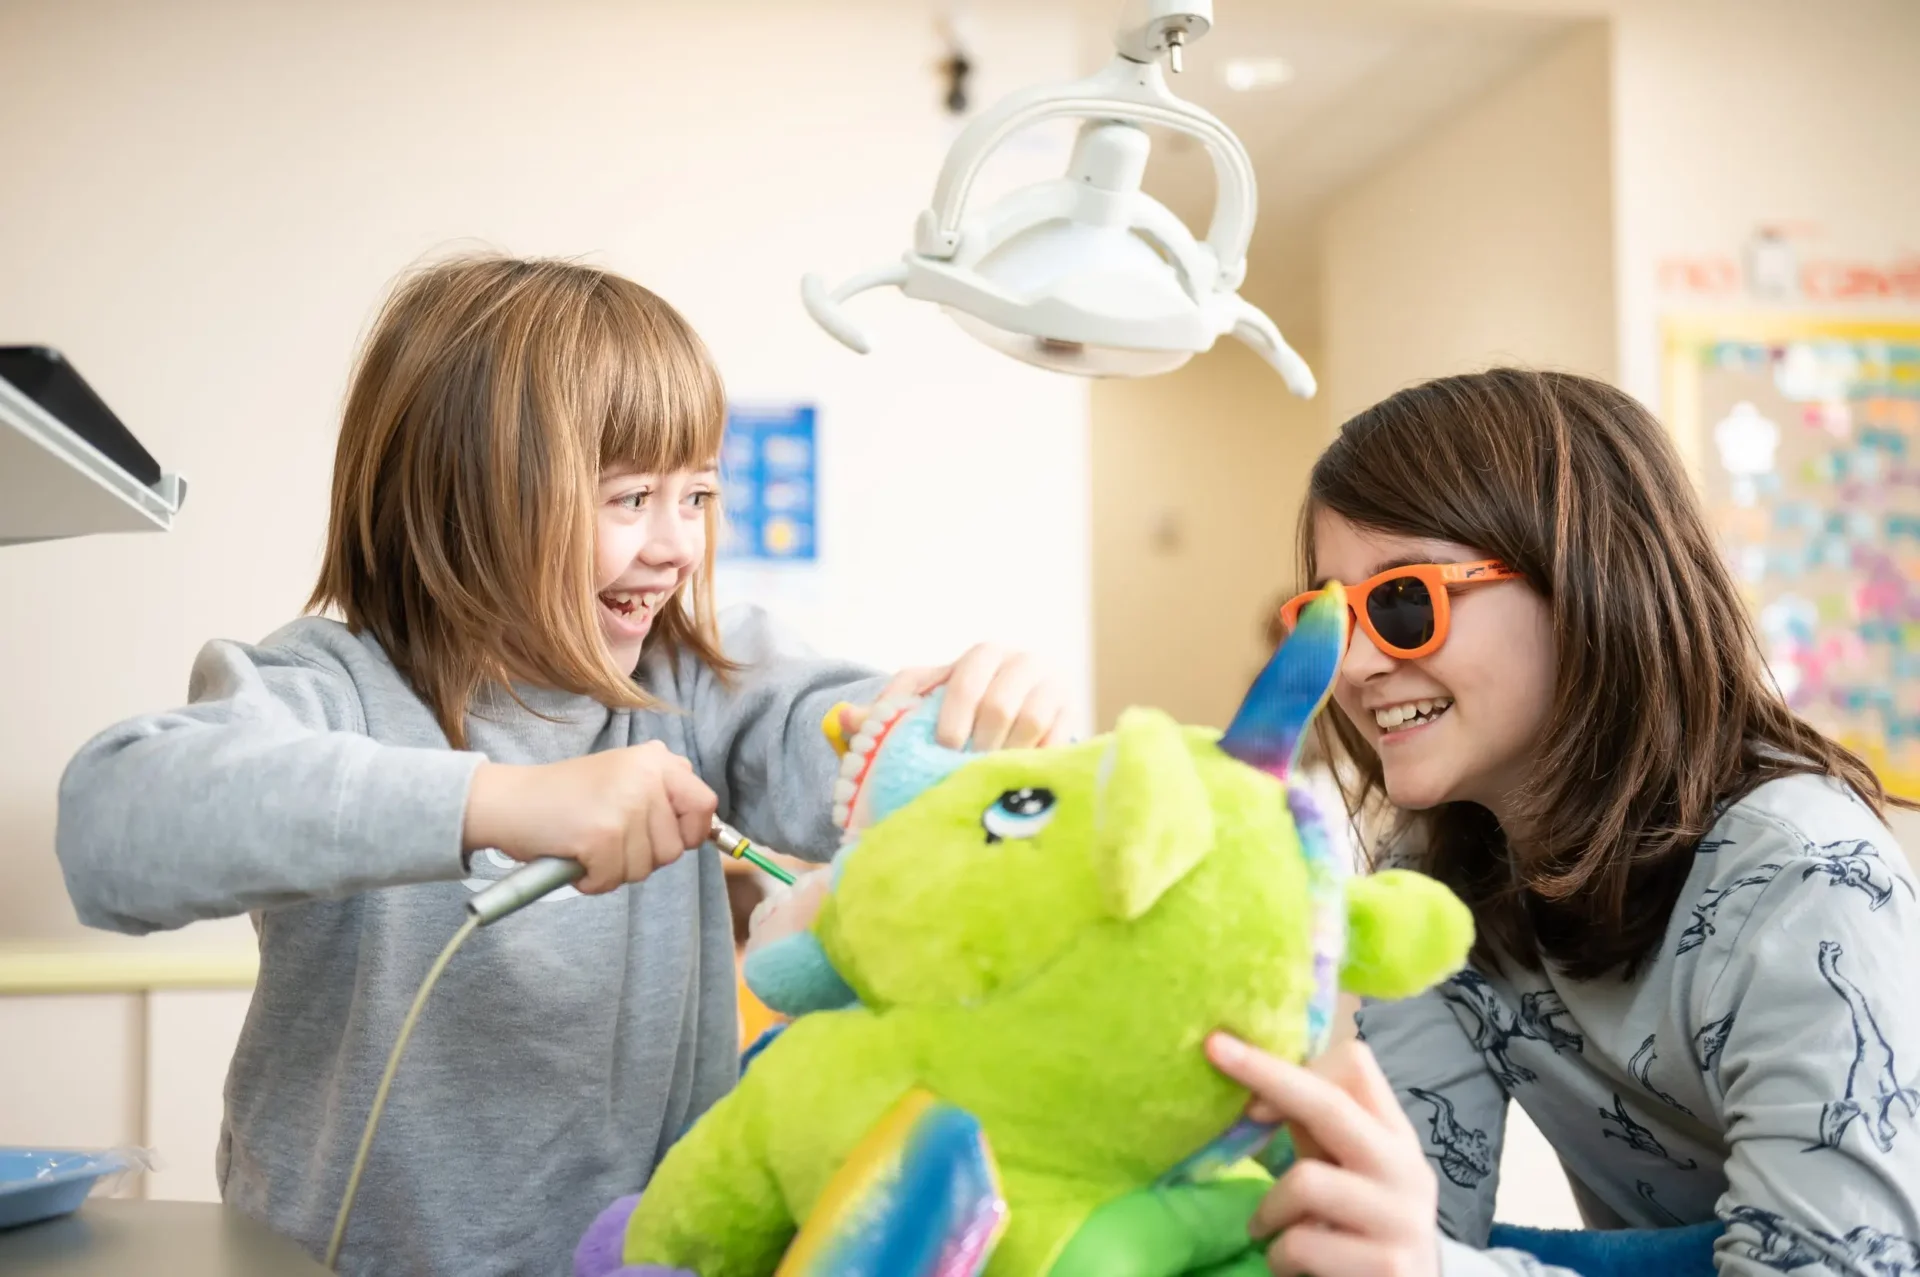 7 Most Common Dental Issues in Children: What Parents Need to Know